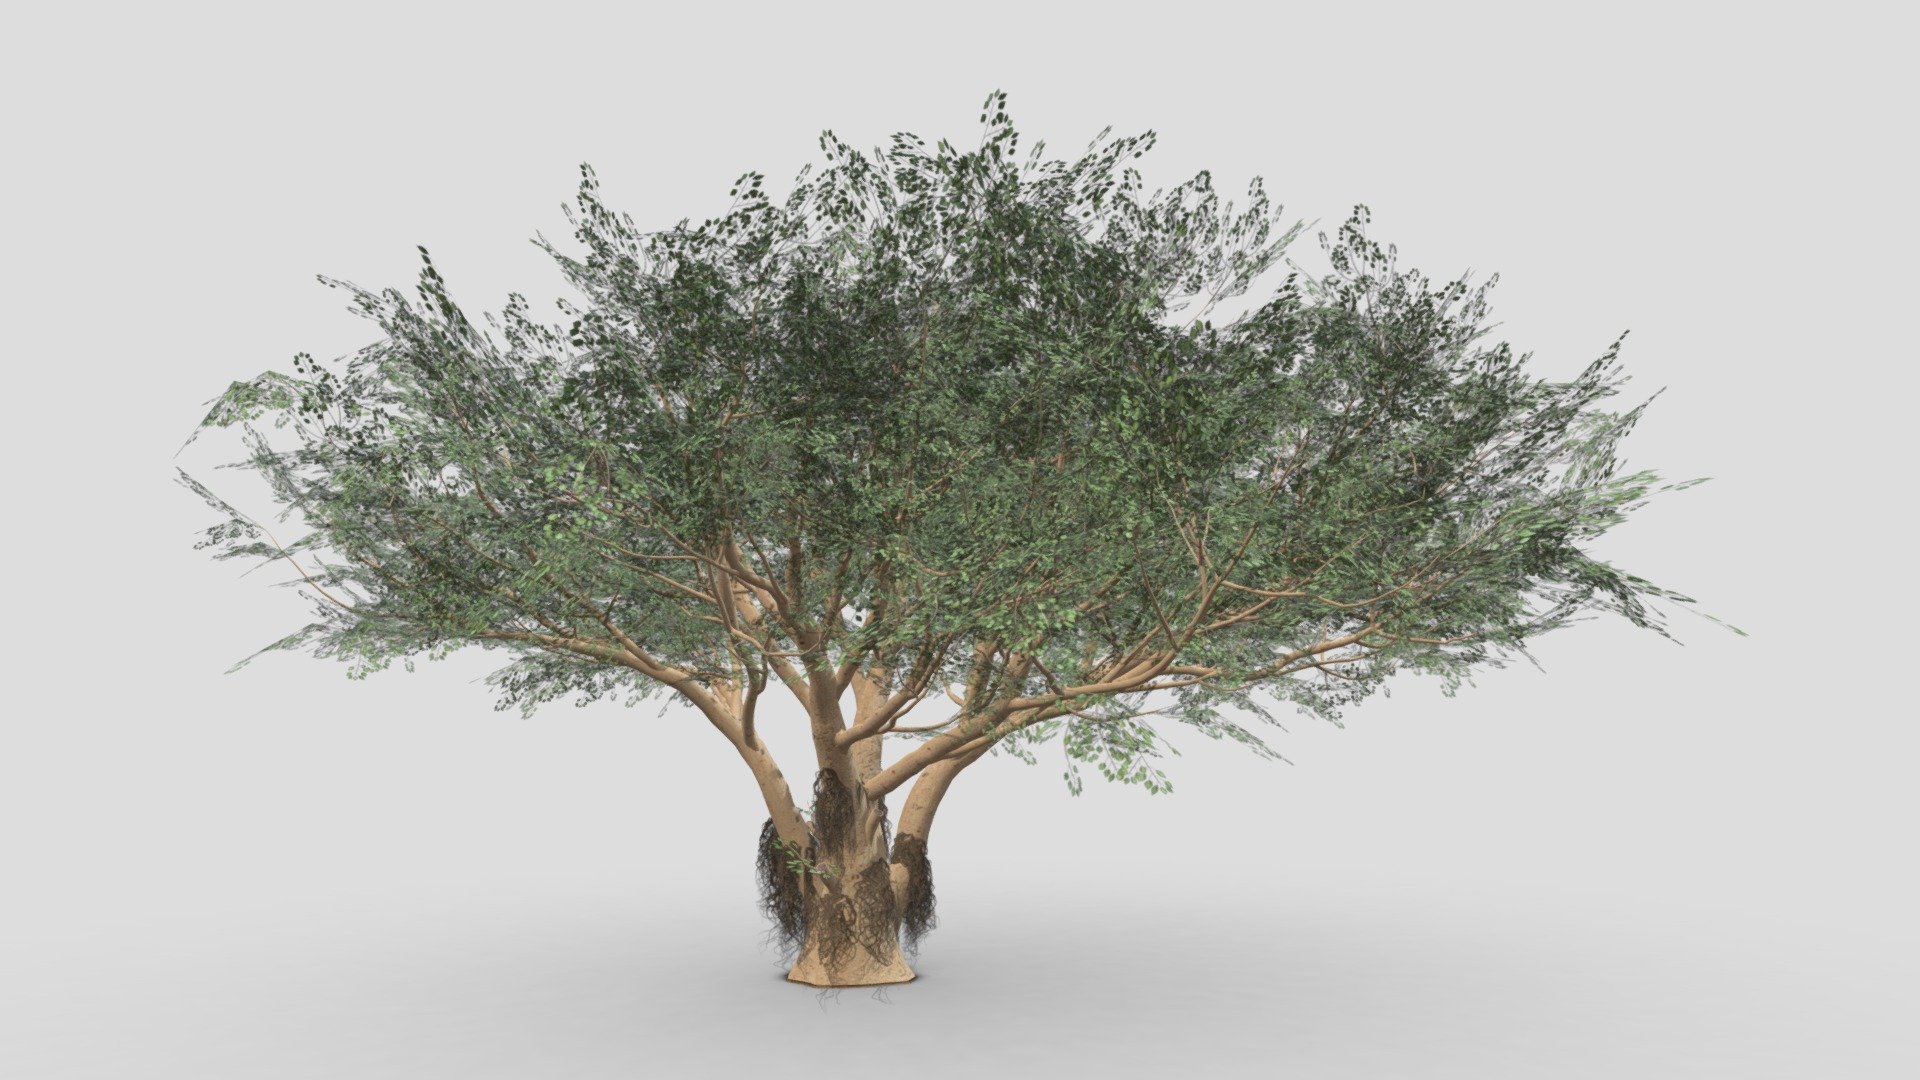 I try to work on Ficus Benjamina Tree to use this your project. this is a low poly 3D model. 
Tree info: Ficus Benjamina, commonly known as weeping fig, benjamin fig, or ficus tree, and often sold in stores as just ficus, is a species of flowering plant in the family Moraceae, native to Asia and Australia. It is the official tree of Bangkok 3d model